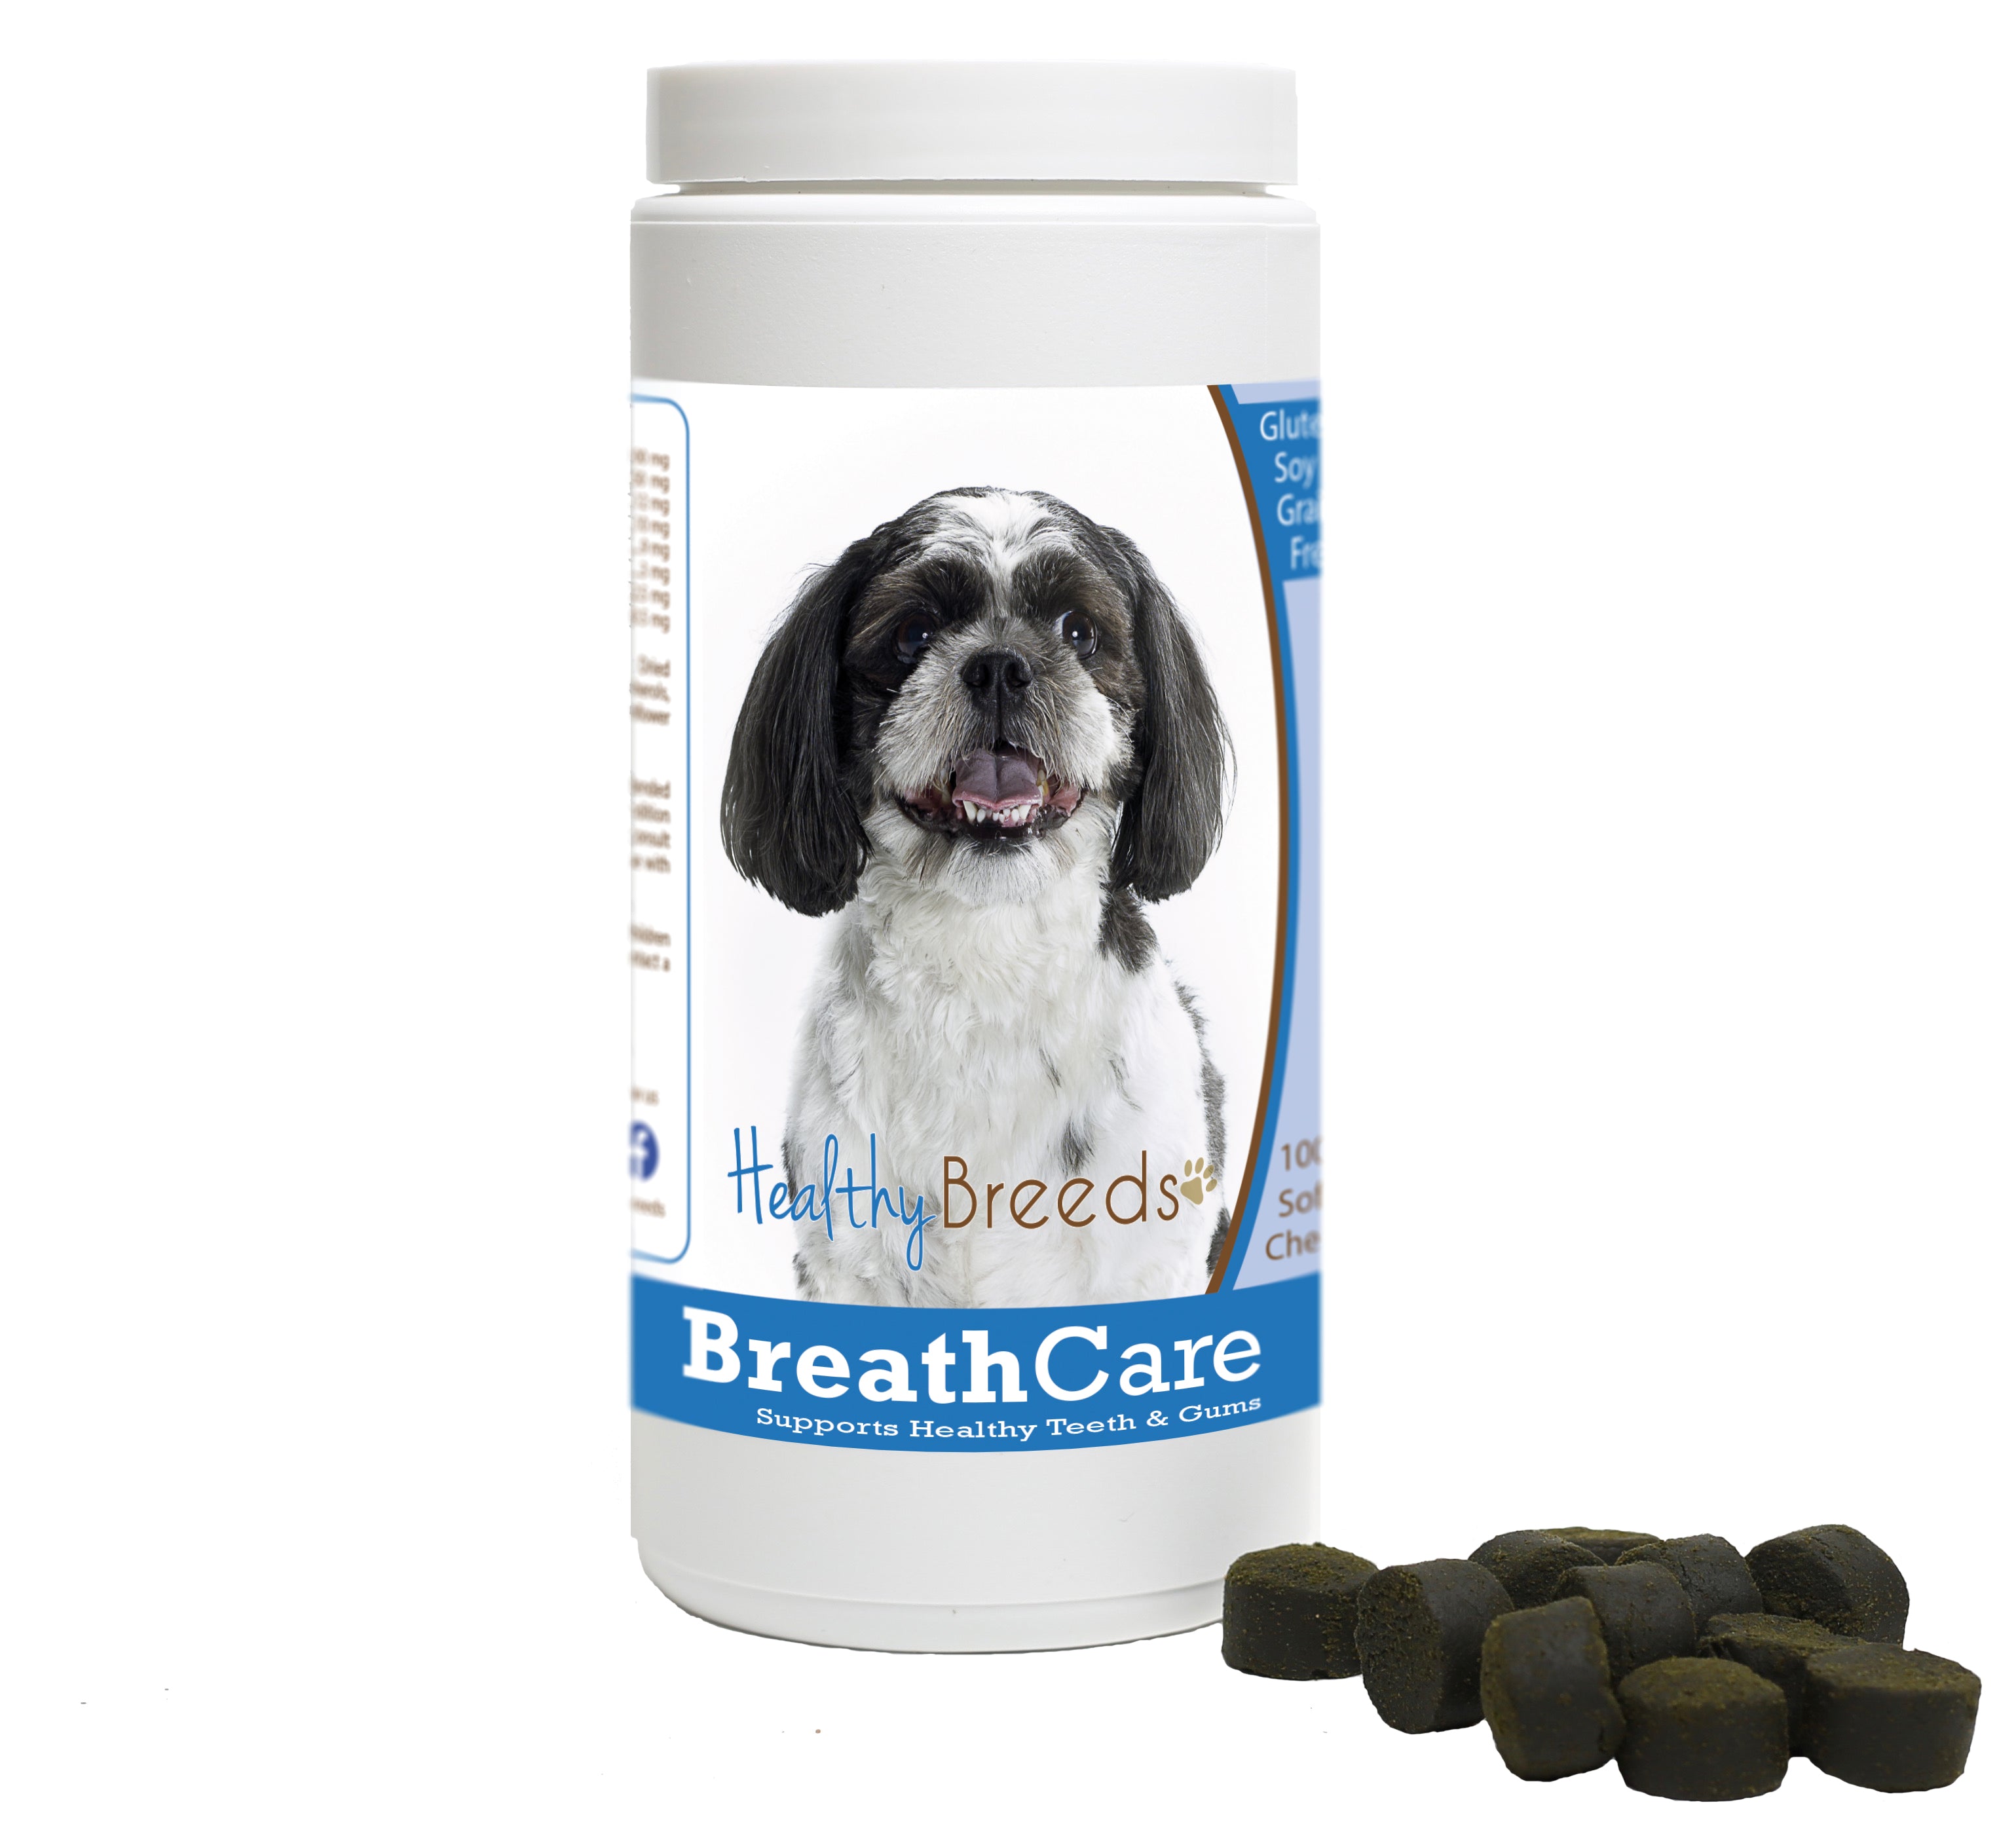 Shih-Poo Breath Care Soft Chews for Dogs 100 Count